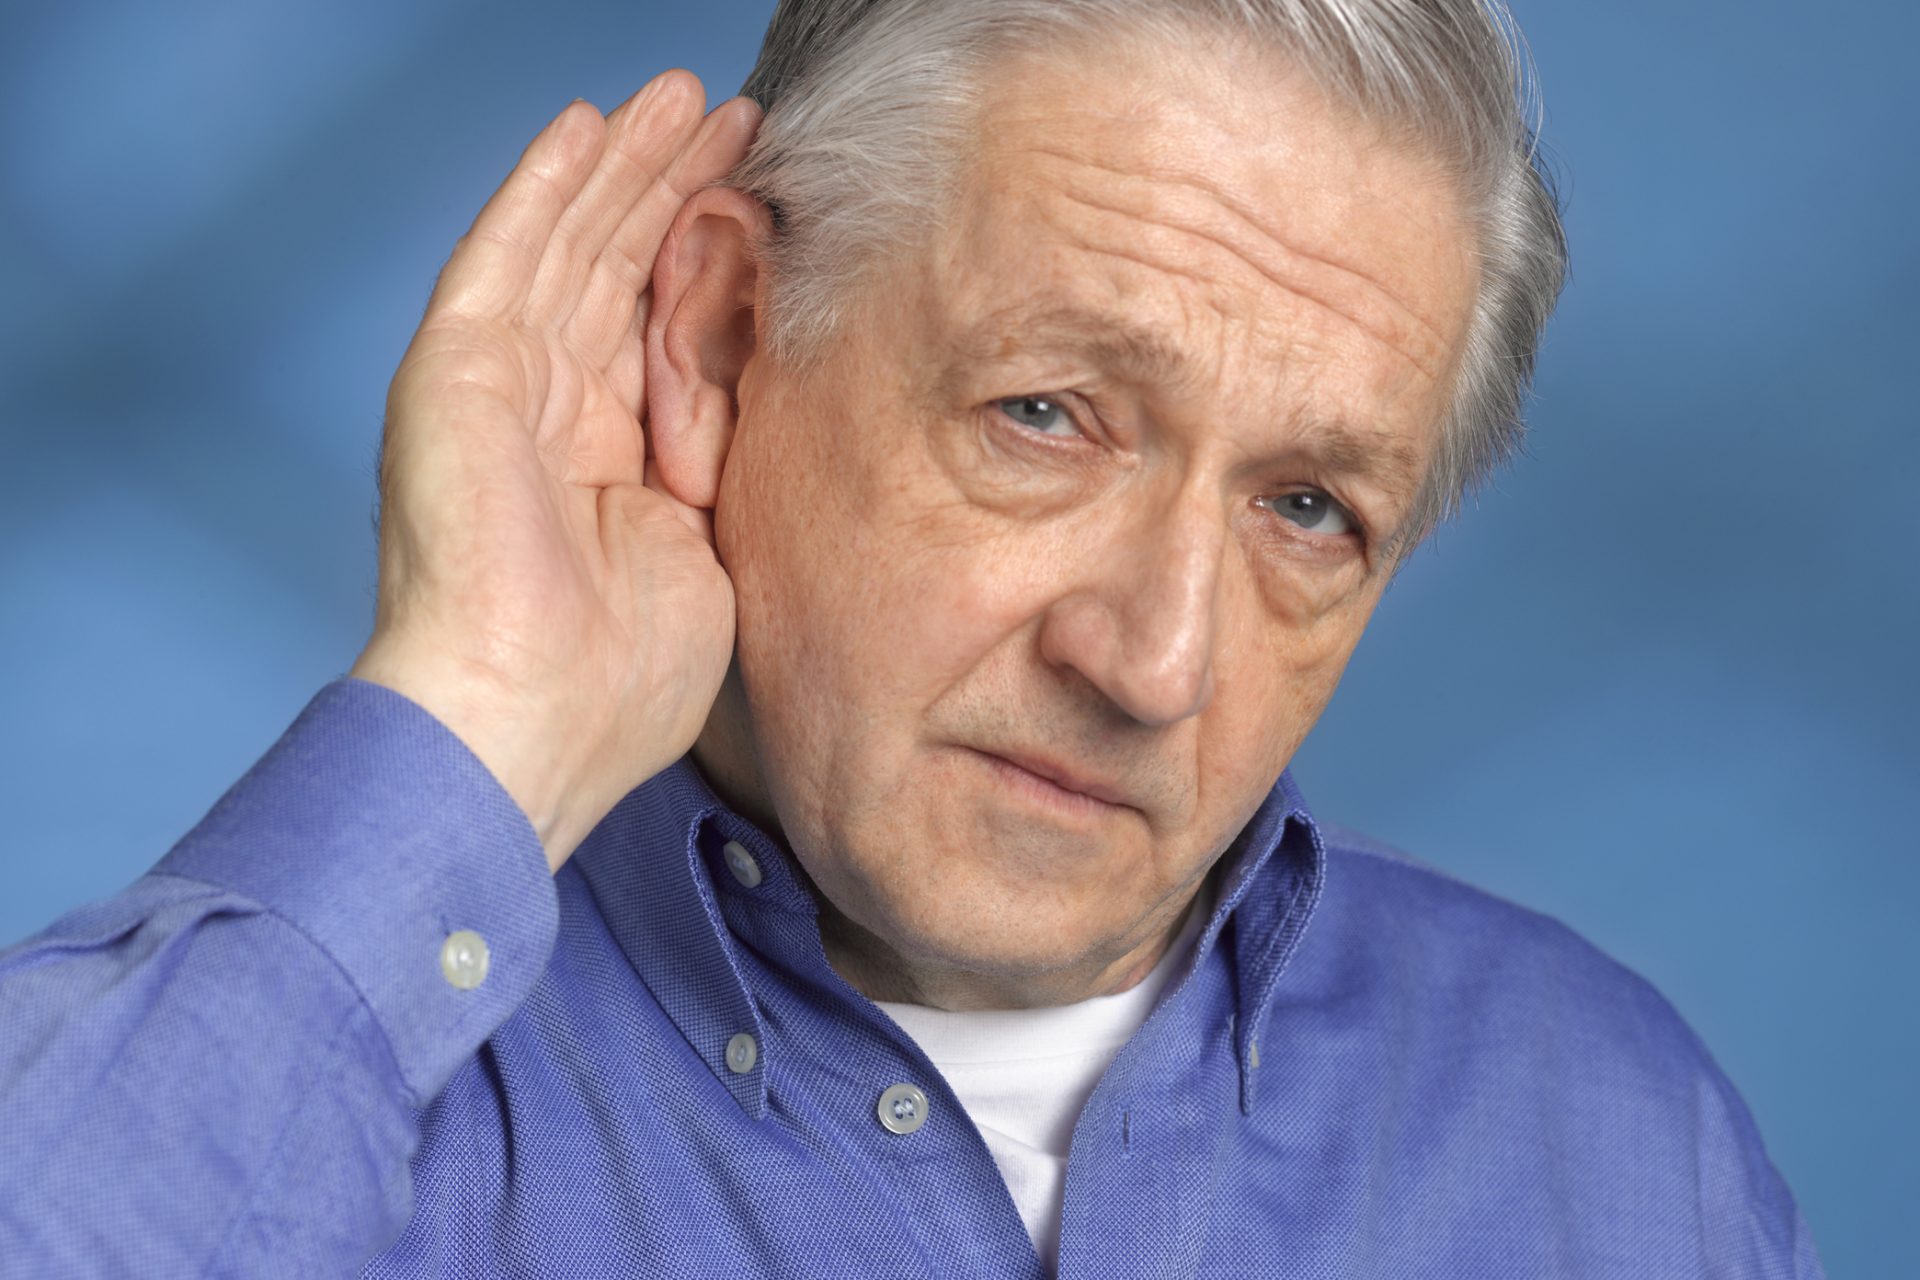 Researchers just reversed hearing loss in mice and it could help humans